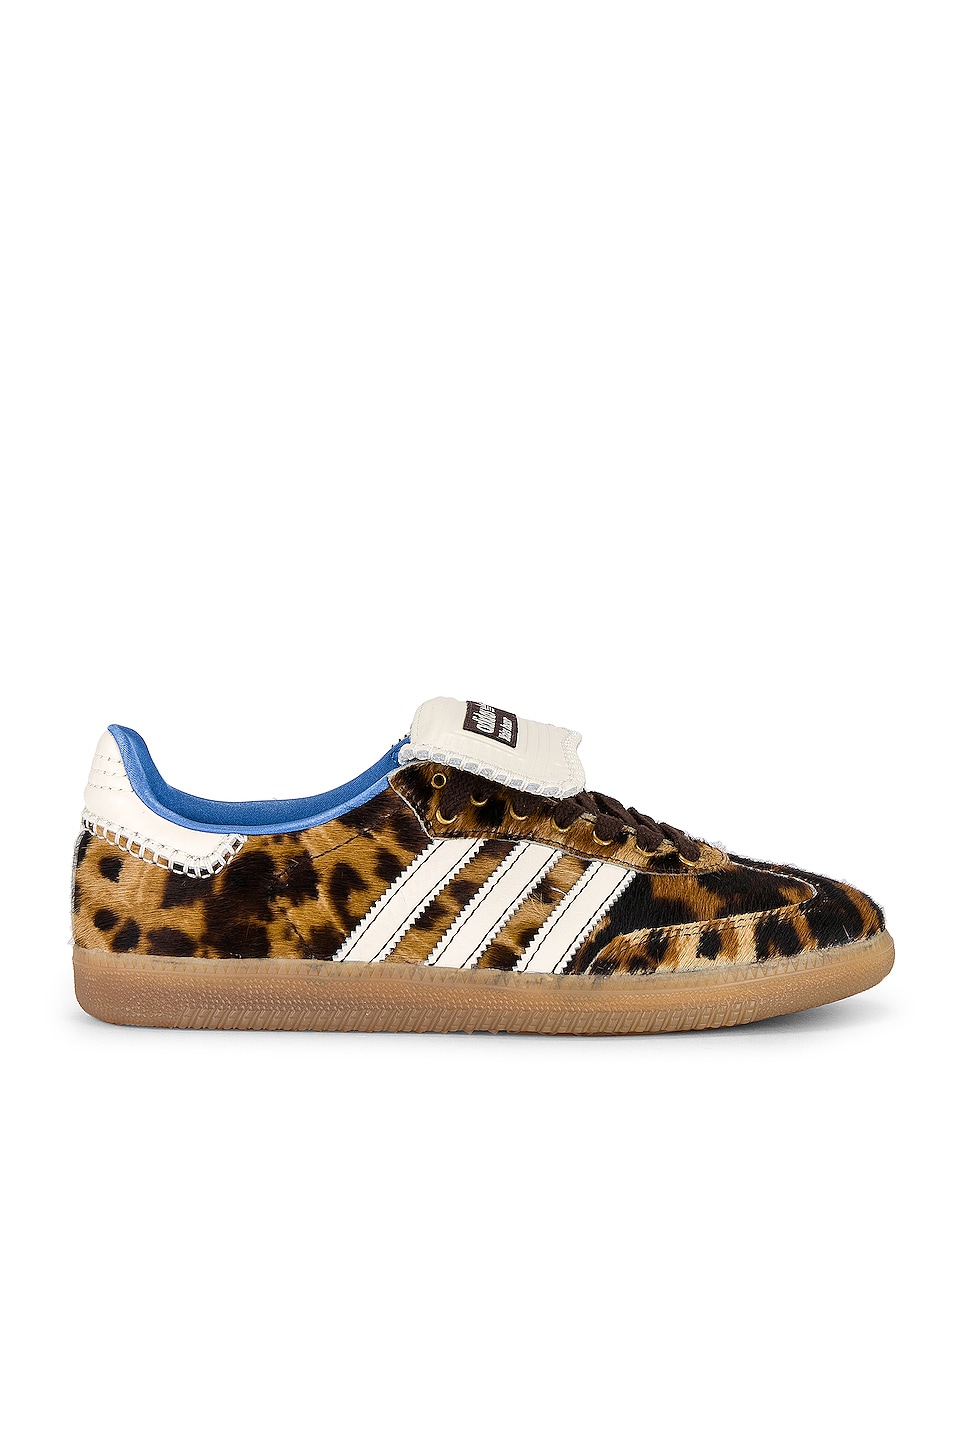 adidas by Wales Bonner Pony Leopard Samba Sneaker in DBROWN/CWHITE/NON ...